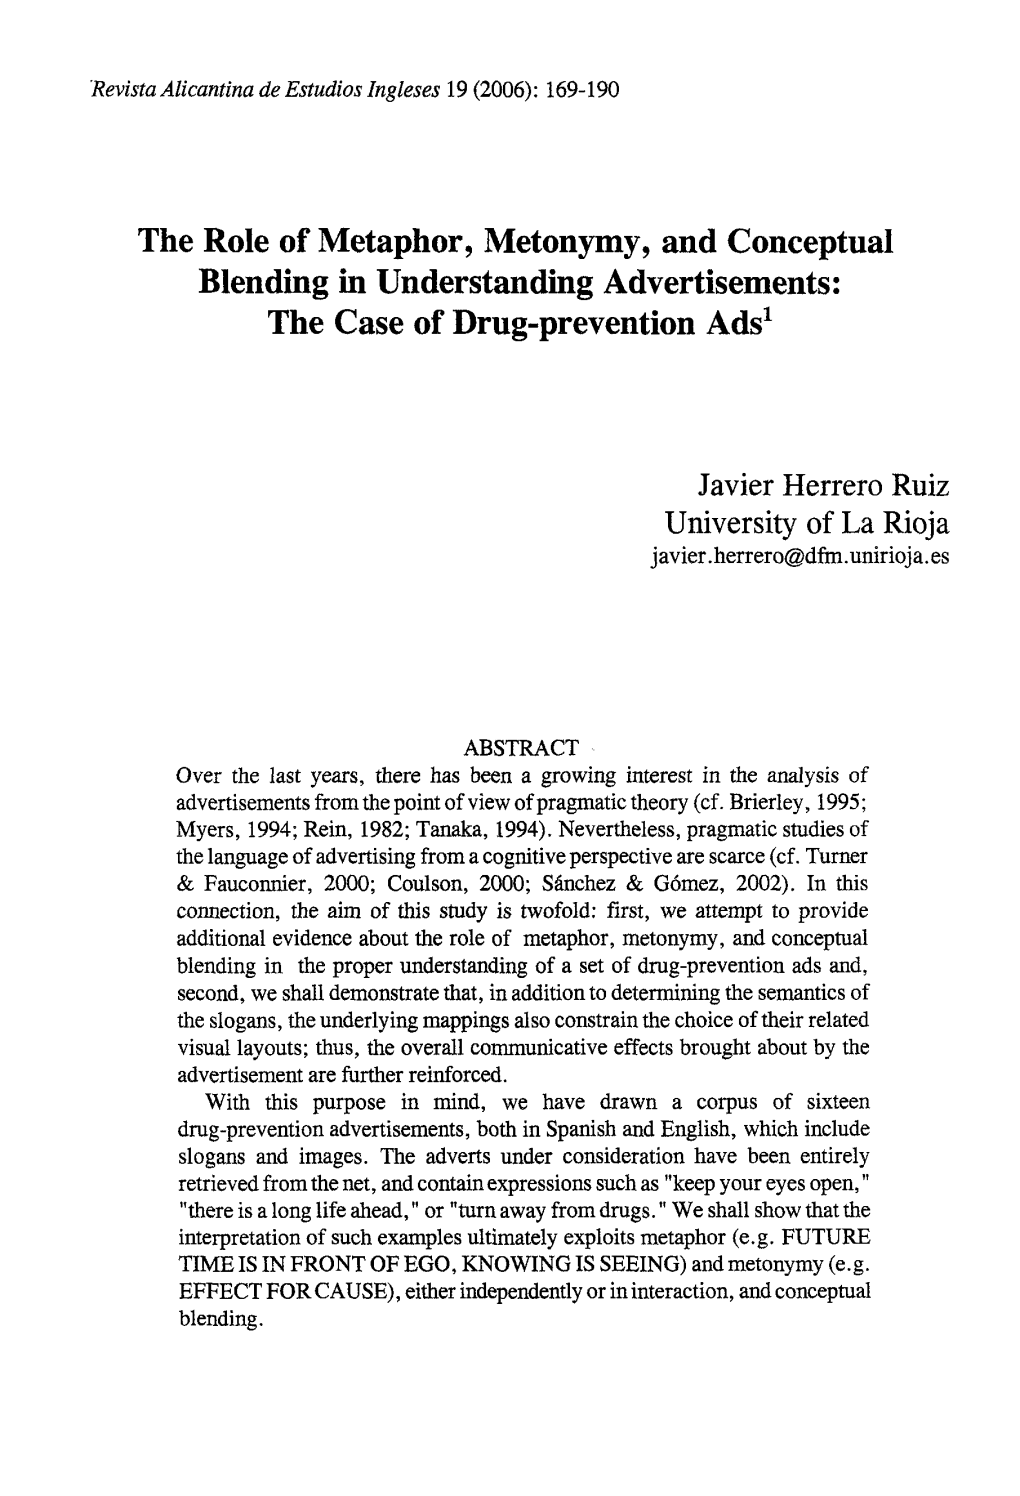 The Role of Metaphor, Metonymy, and Conceptual Blending in Understanding Advertisements: the Case of Drug-Prevention Ads1